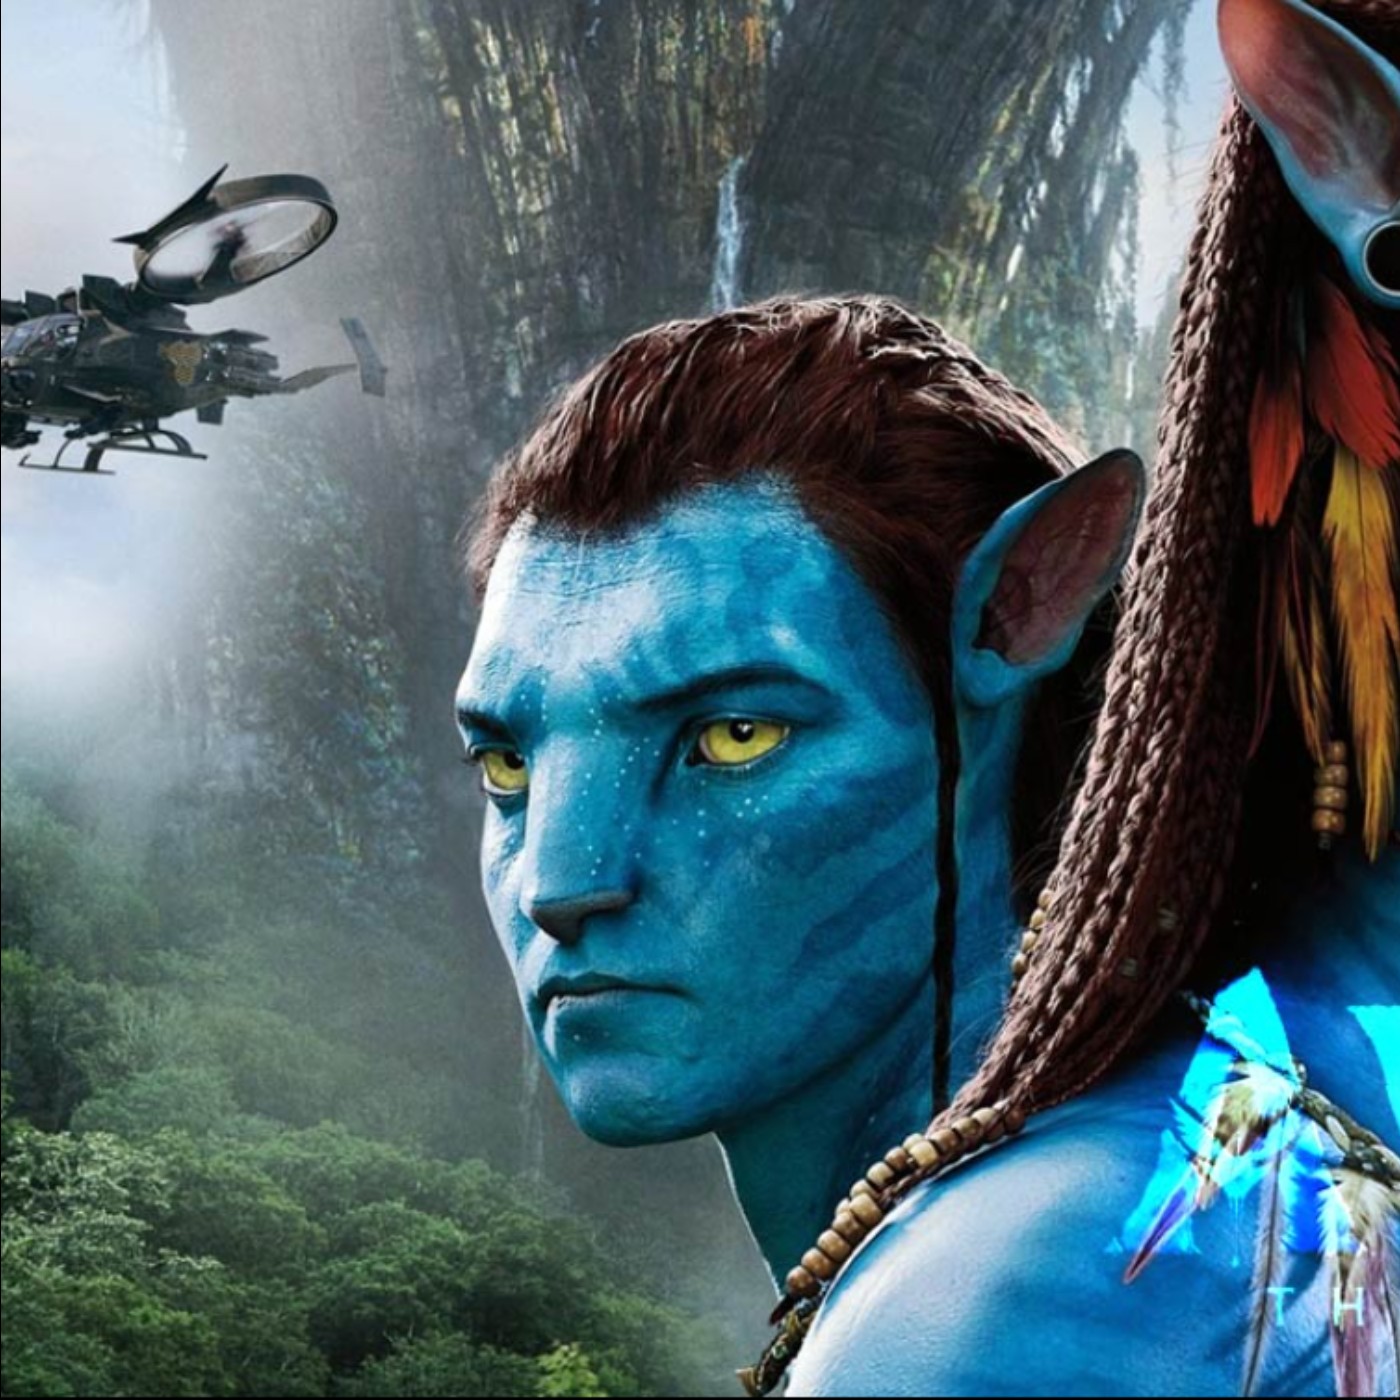 Avatar The Way of Water  watch streaming online